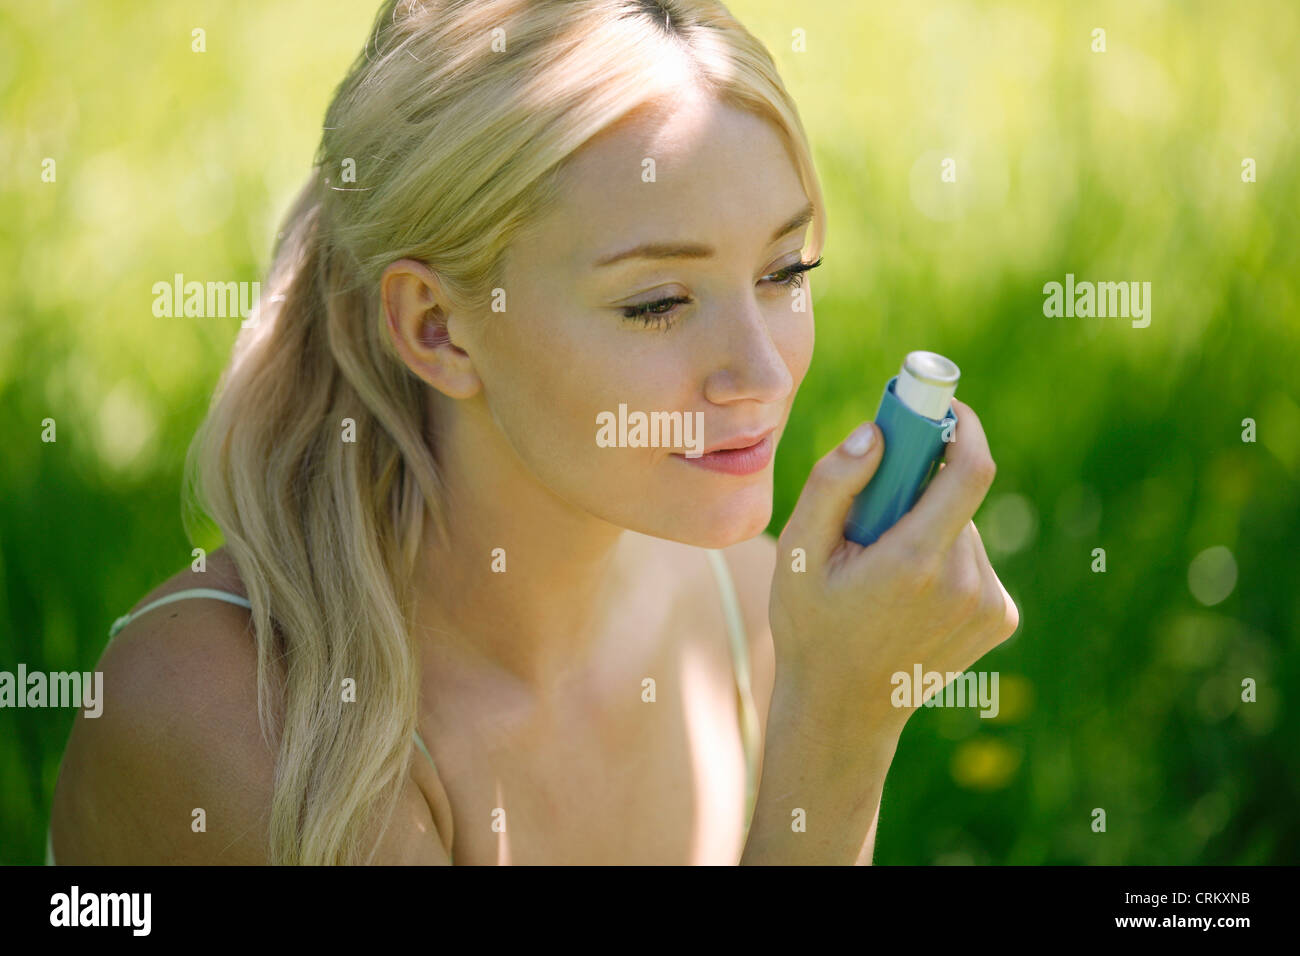 A young blond woman sitting in the grass using a asthma inhaler Stock Photo